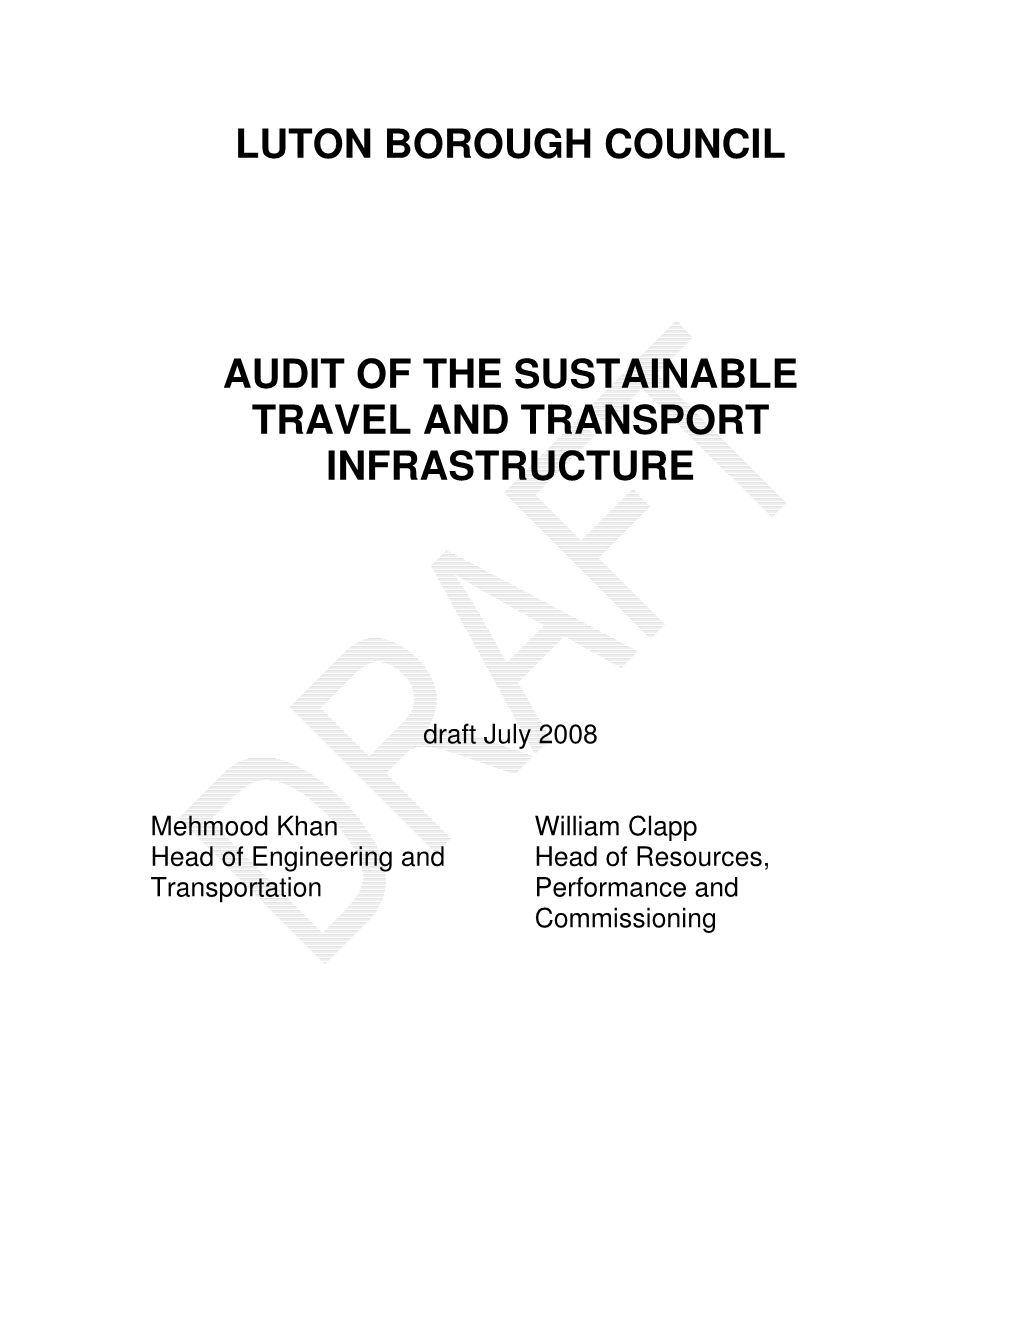 Luton Borough Council Audit of the Sustainable Travel and Transport